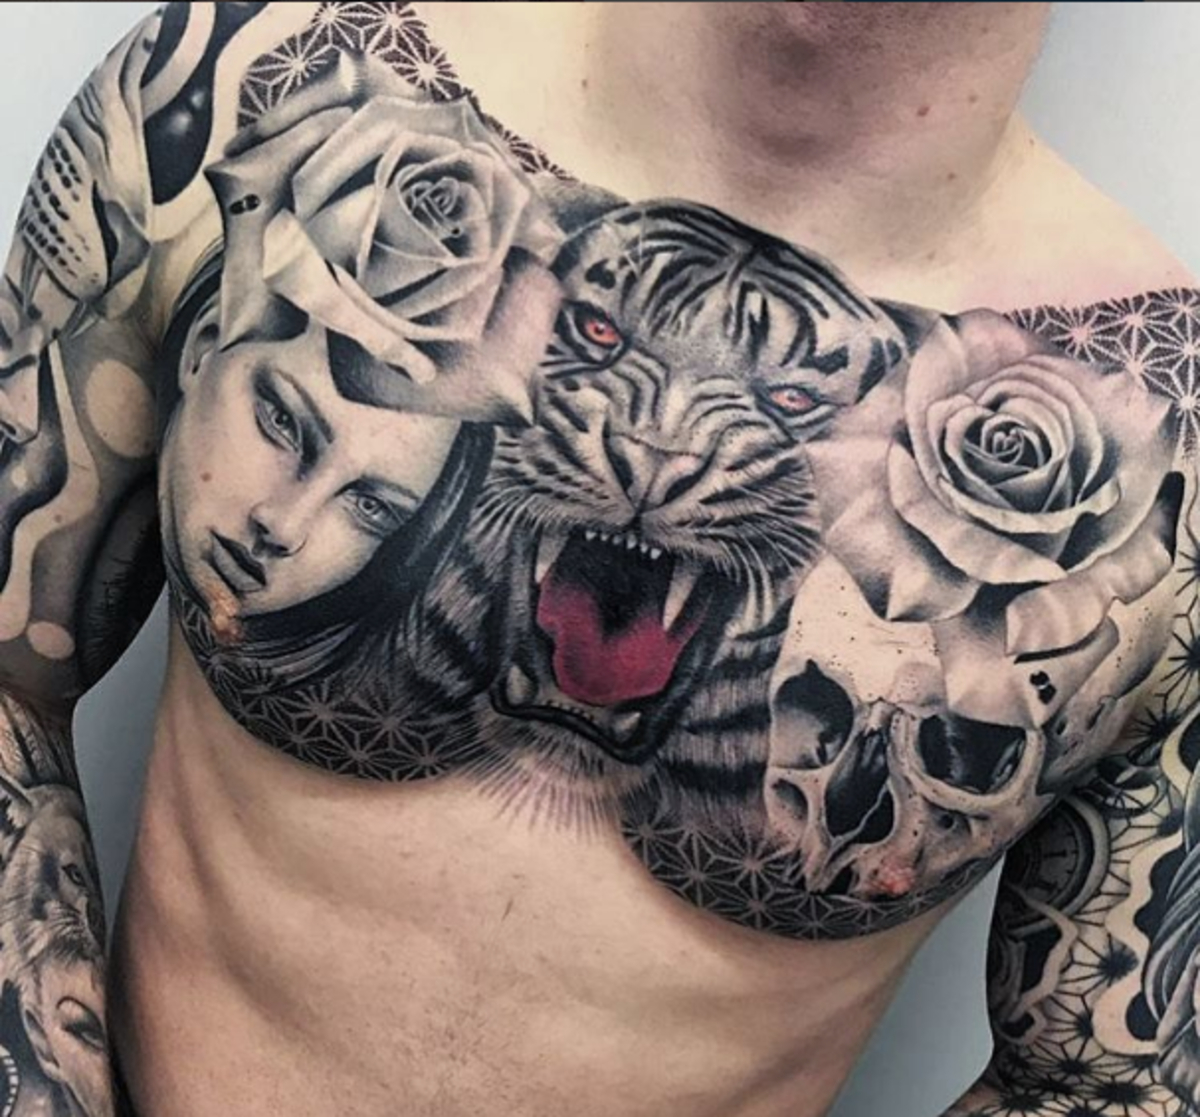 20 Killer Chest Tattoos Tattoo Ideas Artists And Models intended for size 1200 X 1117